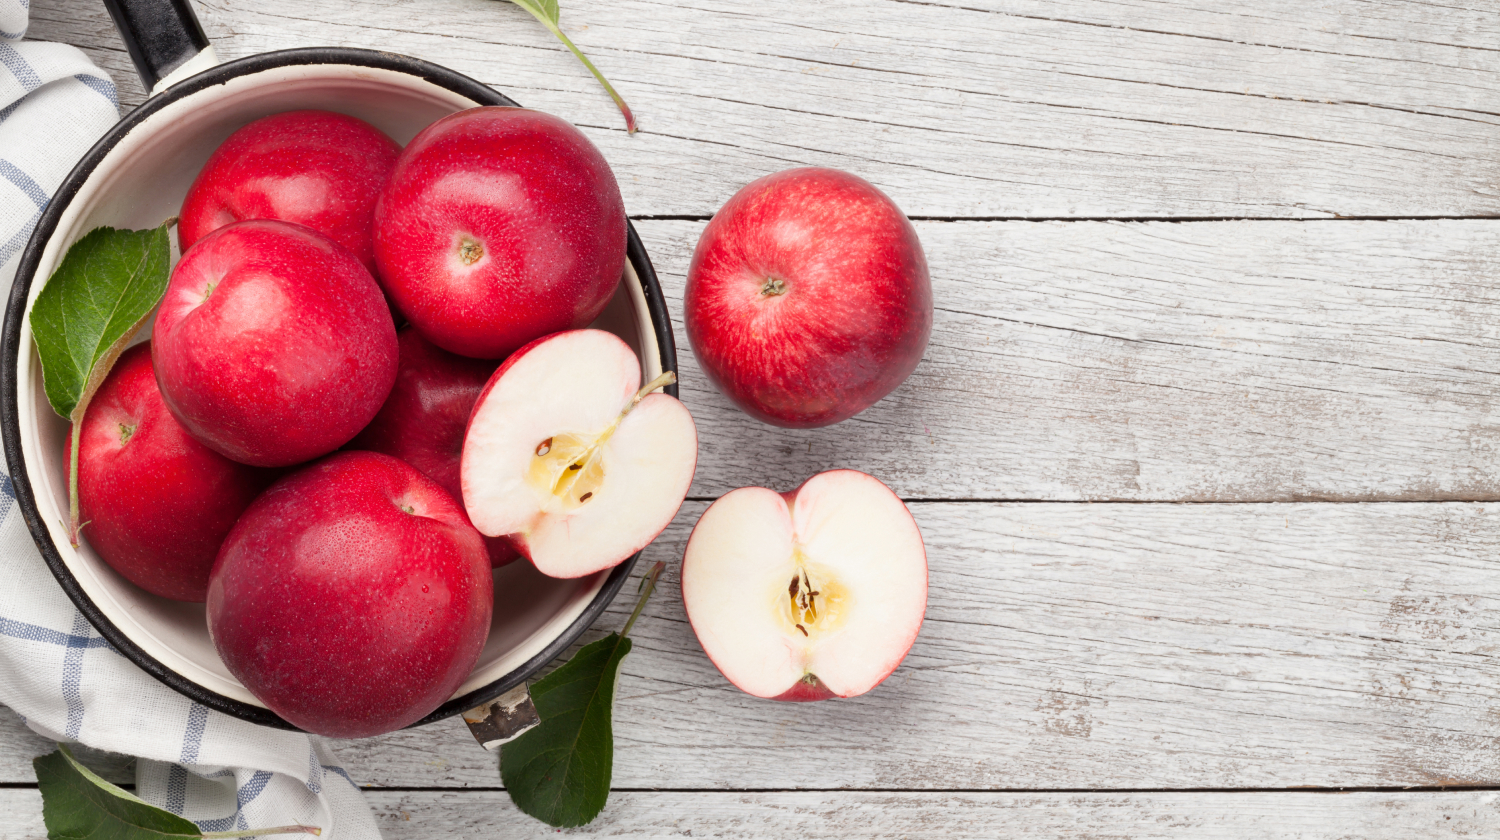 are apples good for weight loss